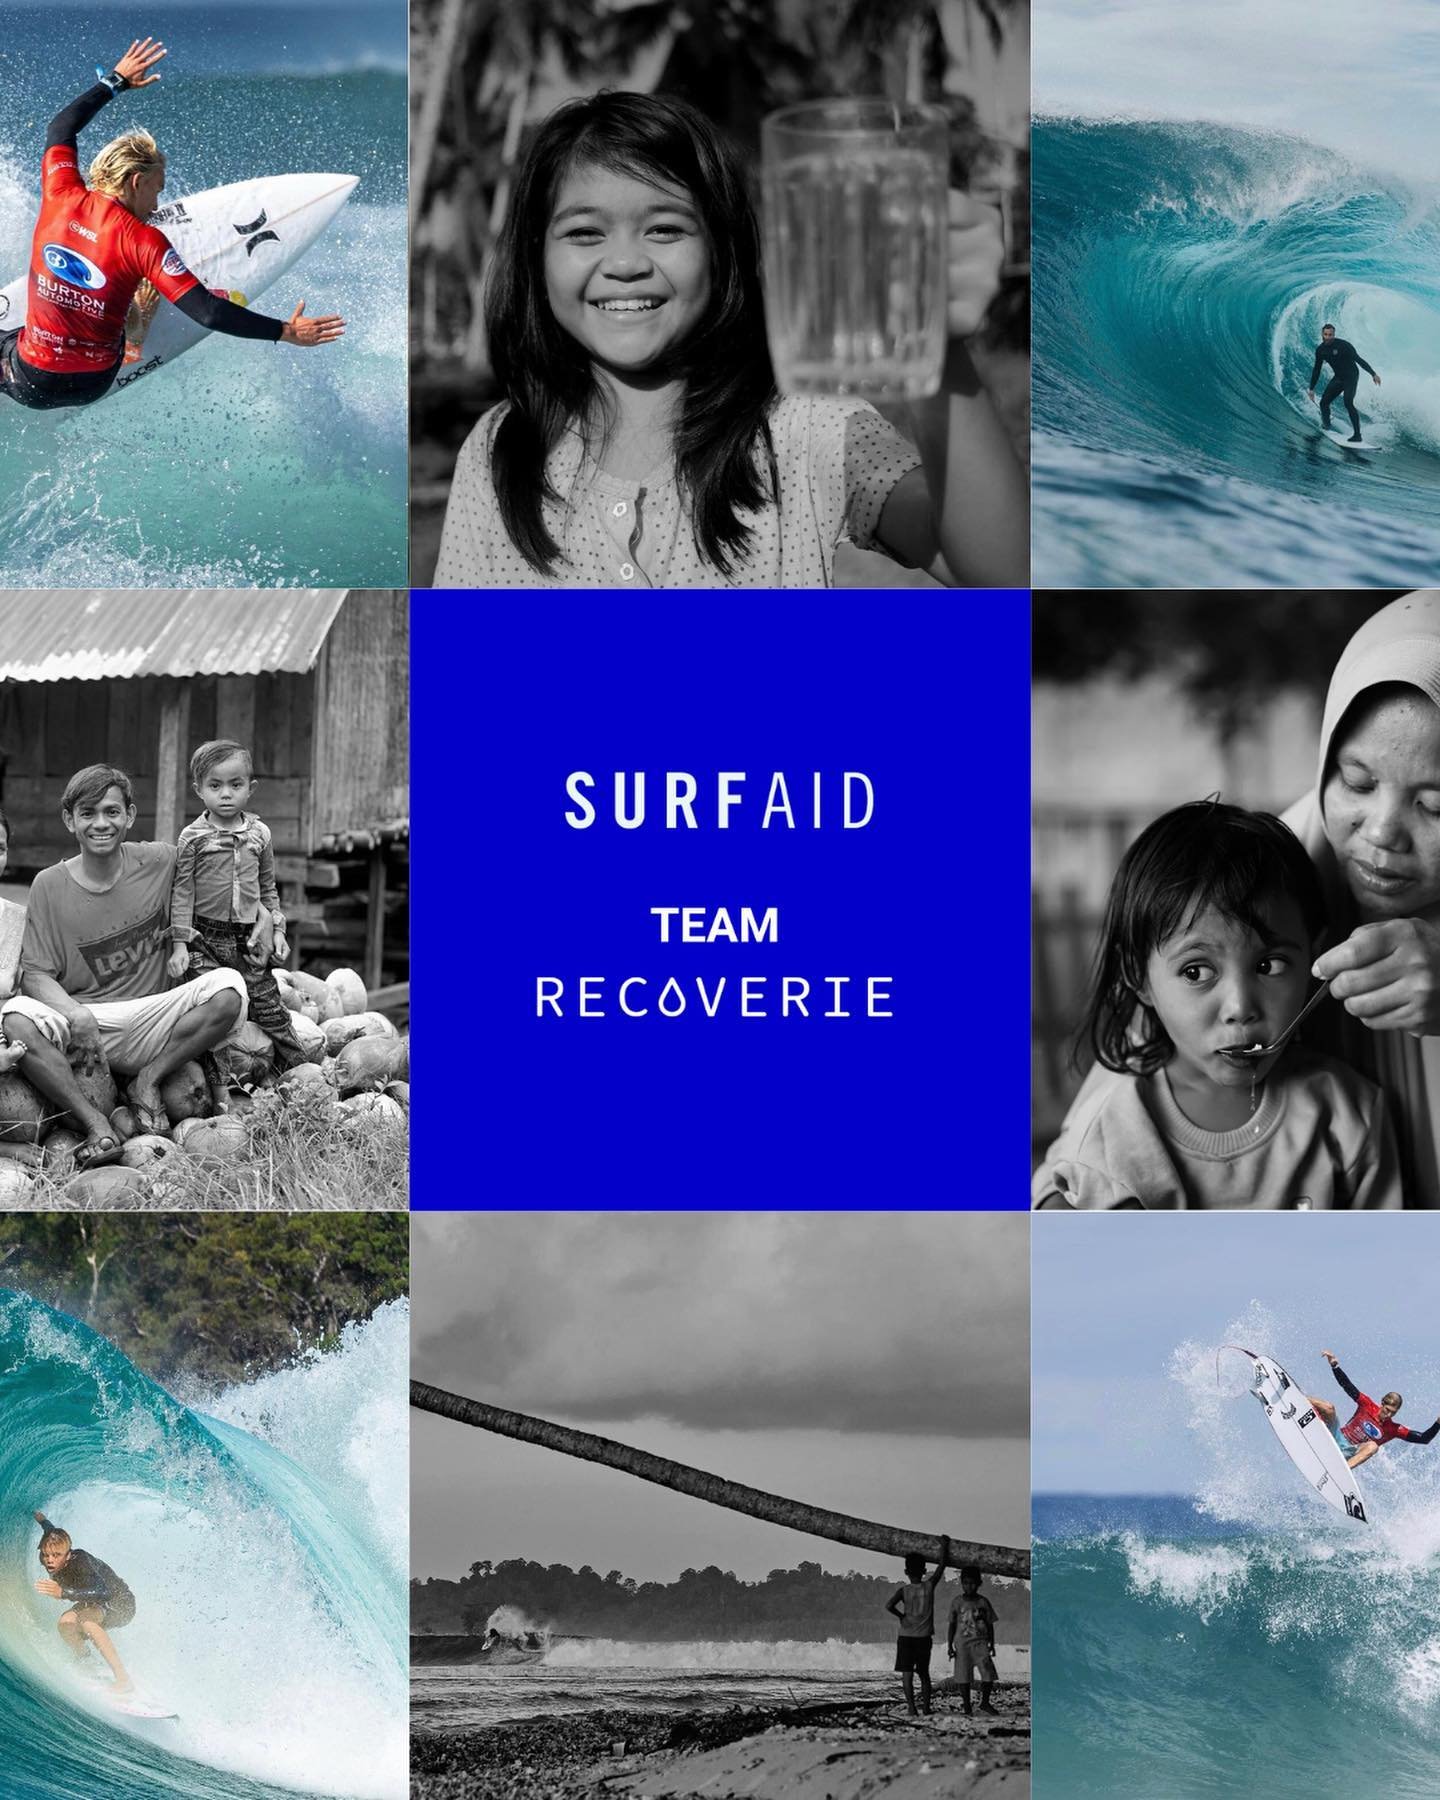 Introducing Team Recoverie for the @surfaid Cup, being held at Bondi on the 17th of May 💙 We've put together a team of five local surfers to form Team Recoverie, compete in this event and to help raise awareness for this incredible charity - meet th